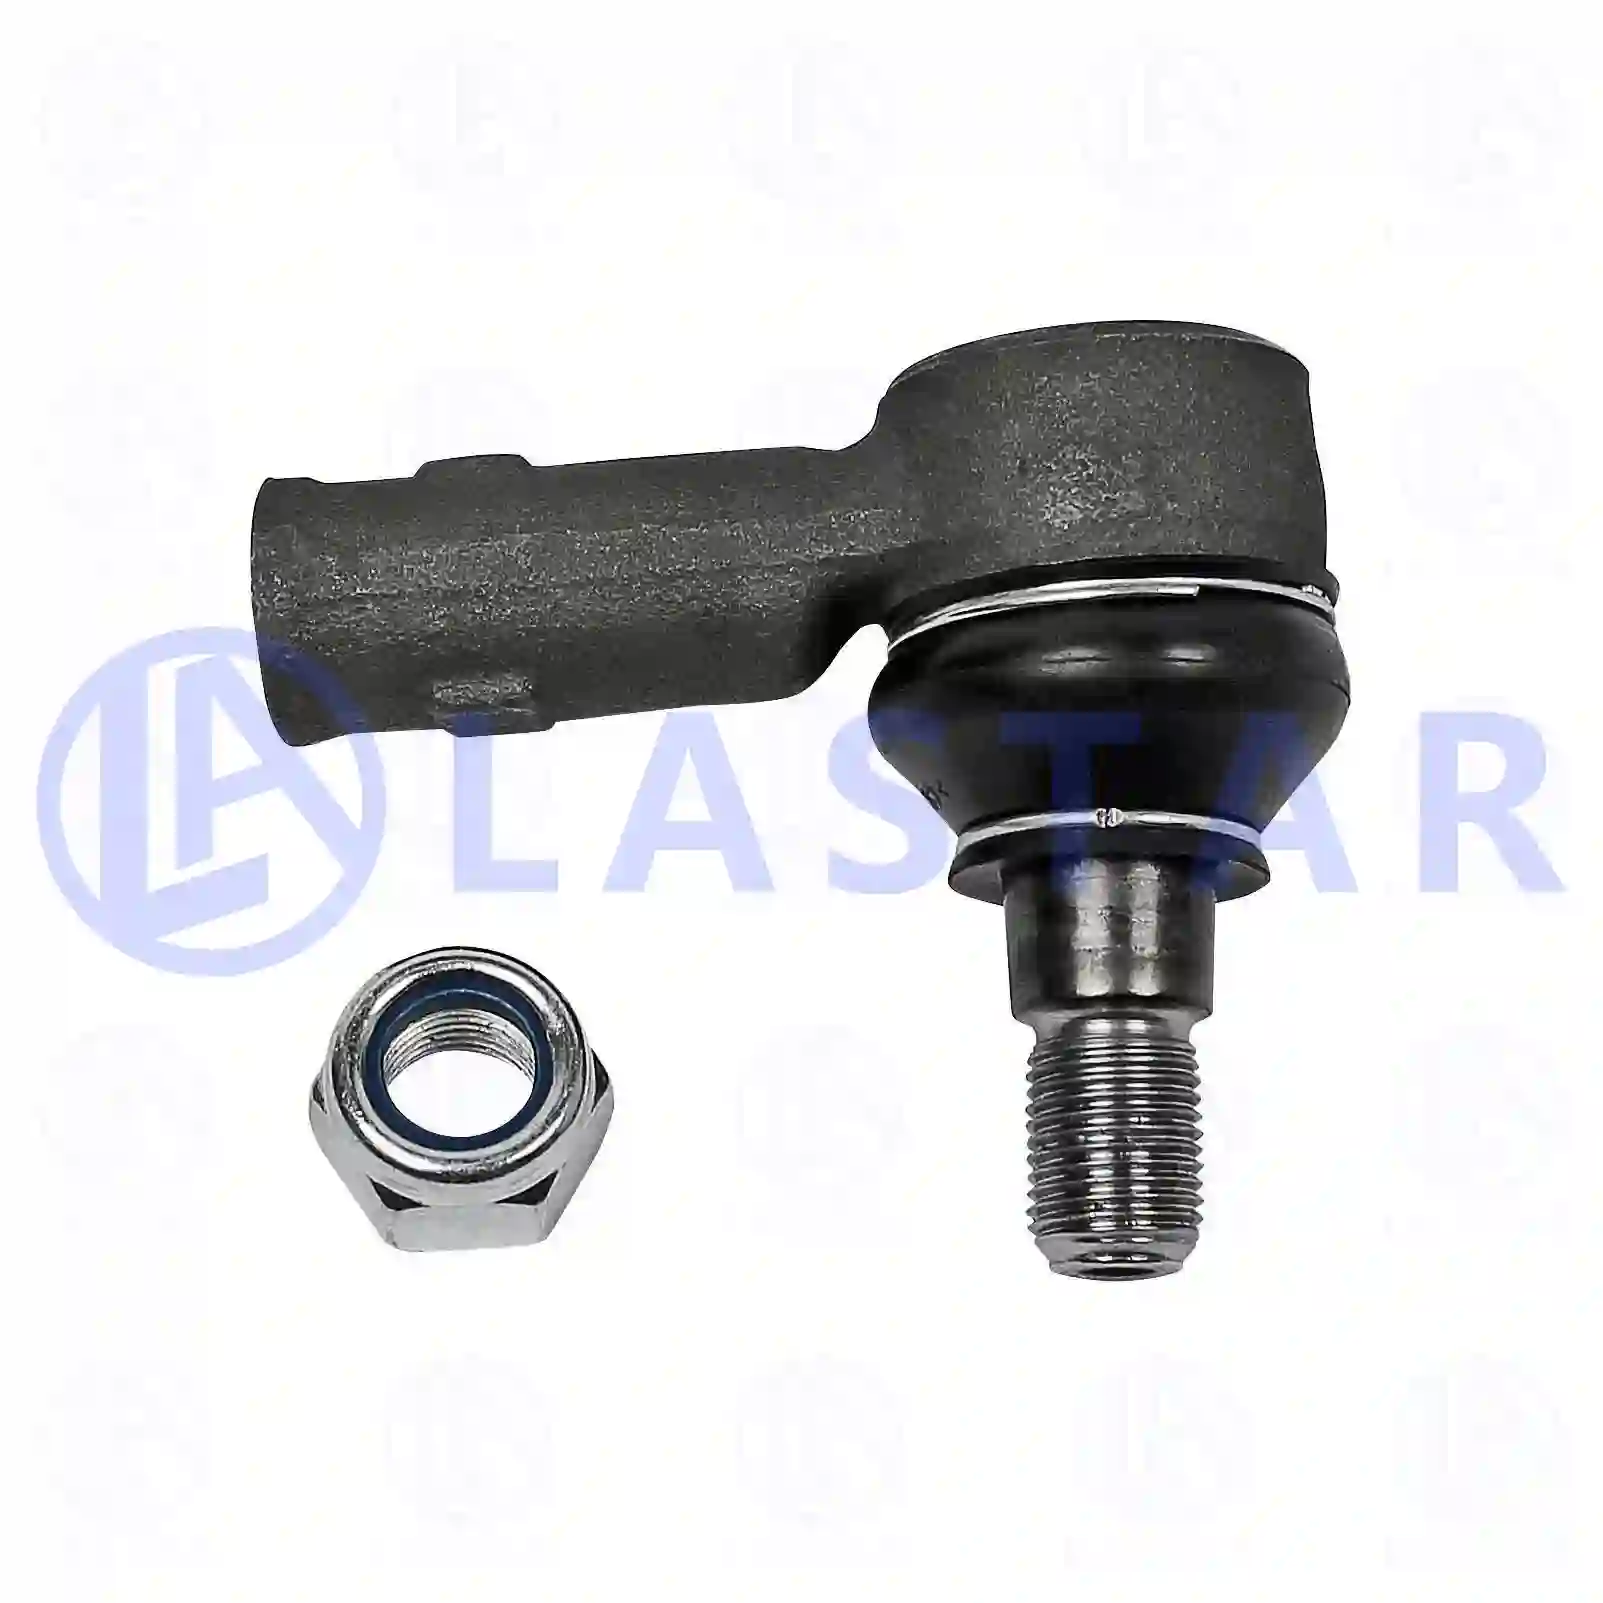 Ball joint, 77705466, 9014600048, 9014600148, 9014600248, 9014600348, 2D0422811, ZG40340-0008 ||  77705466 Lastar Spare Part | Truck Spare Parts, Auotomotive Spare Parts Ball joint, 77705466, 9014600048, 9014600148, 9014600248, 9014600348, 2D0422811, ZG40340-0008 ||  77705466 Lastar Spare Part | Truck Spare Parts, Auotomotive Spare Parts